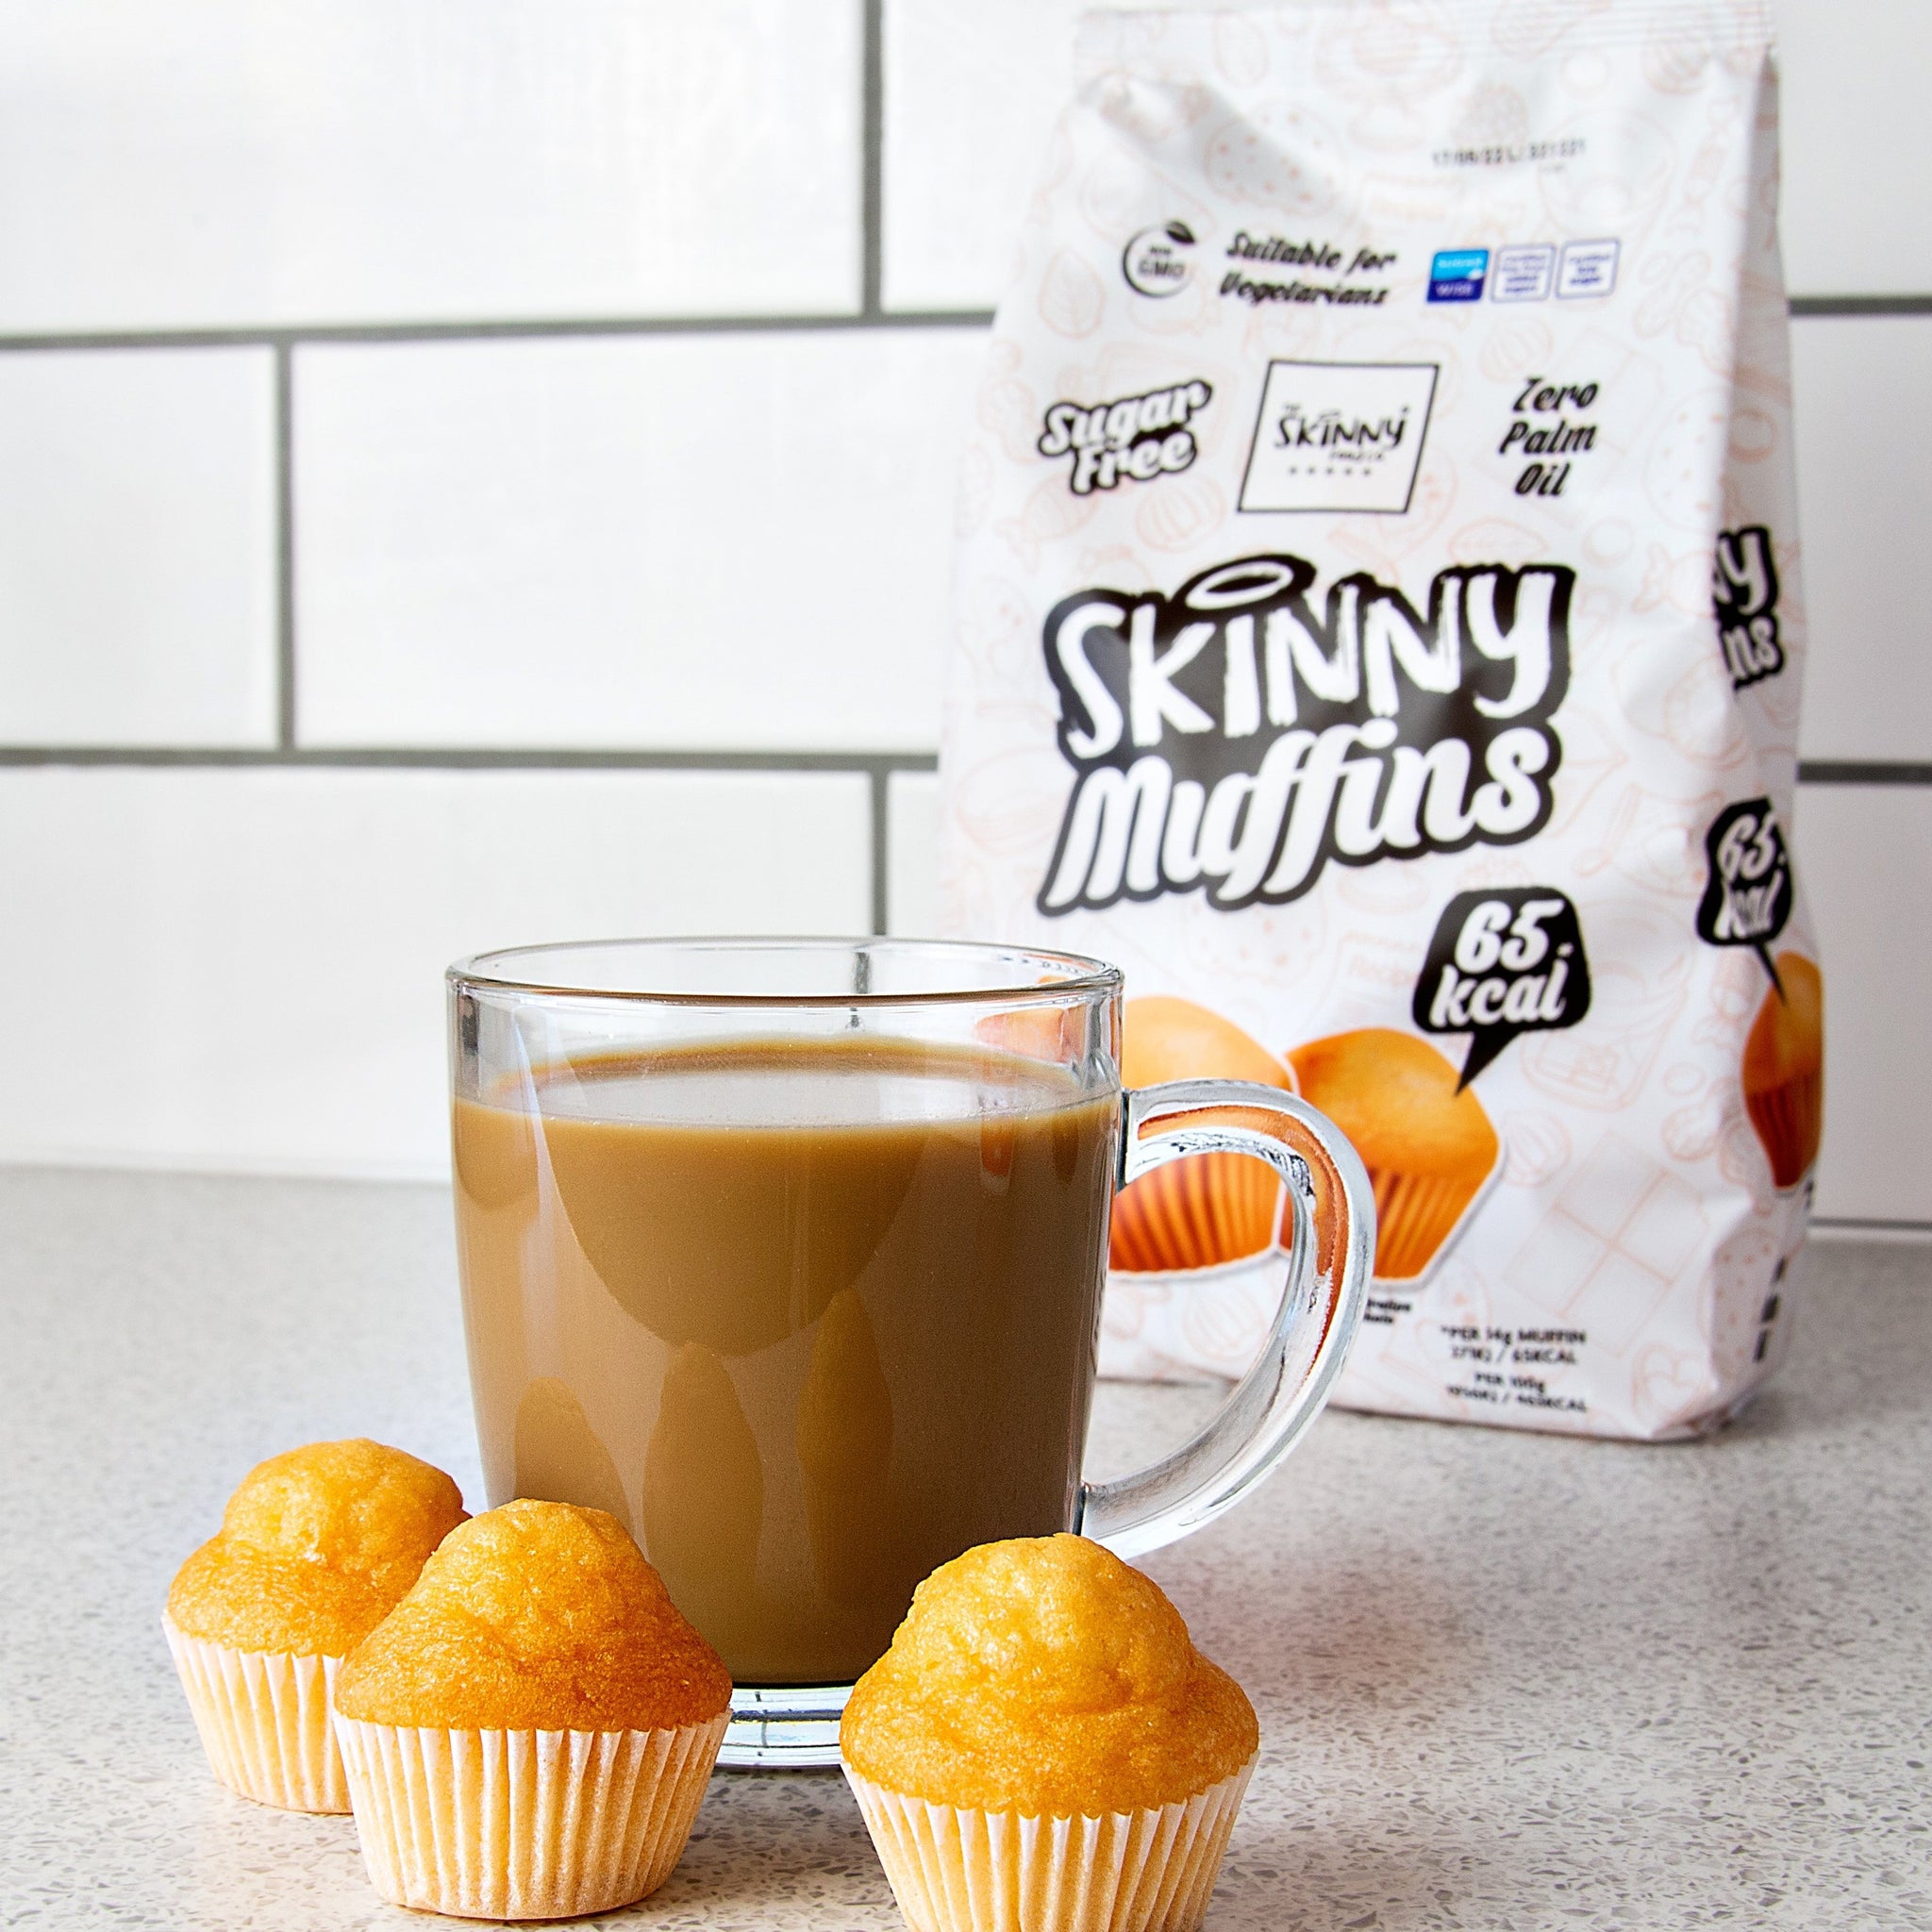 Introducing our NEW Sugar Free Skinny Muffins! | theskinnyfoodco